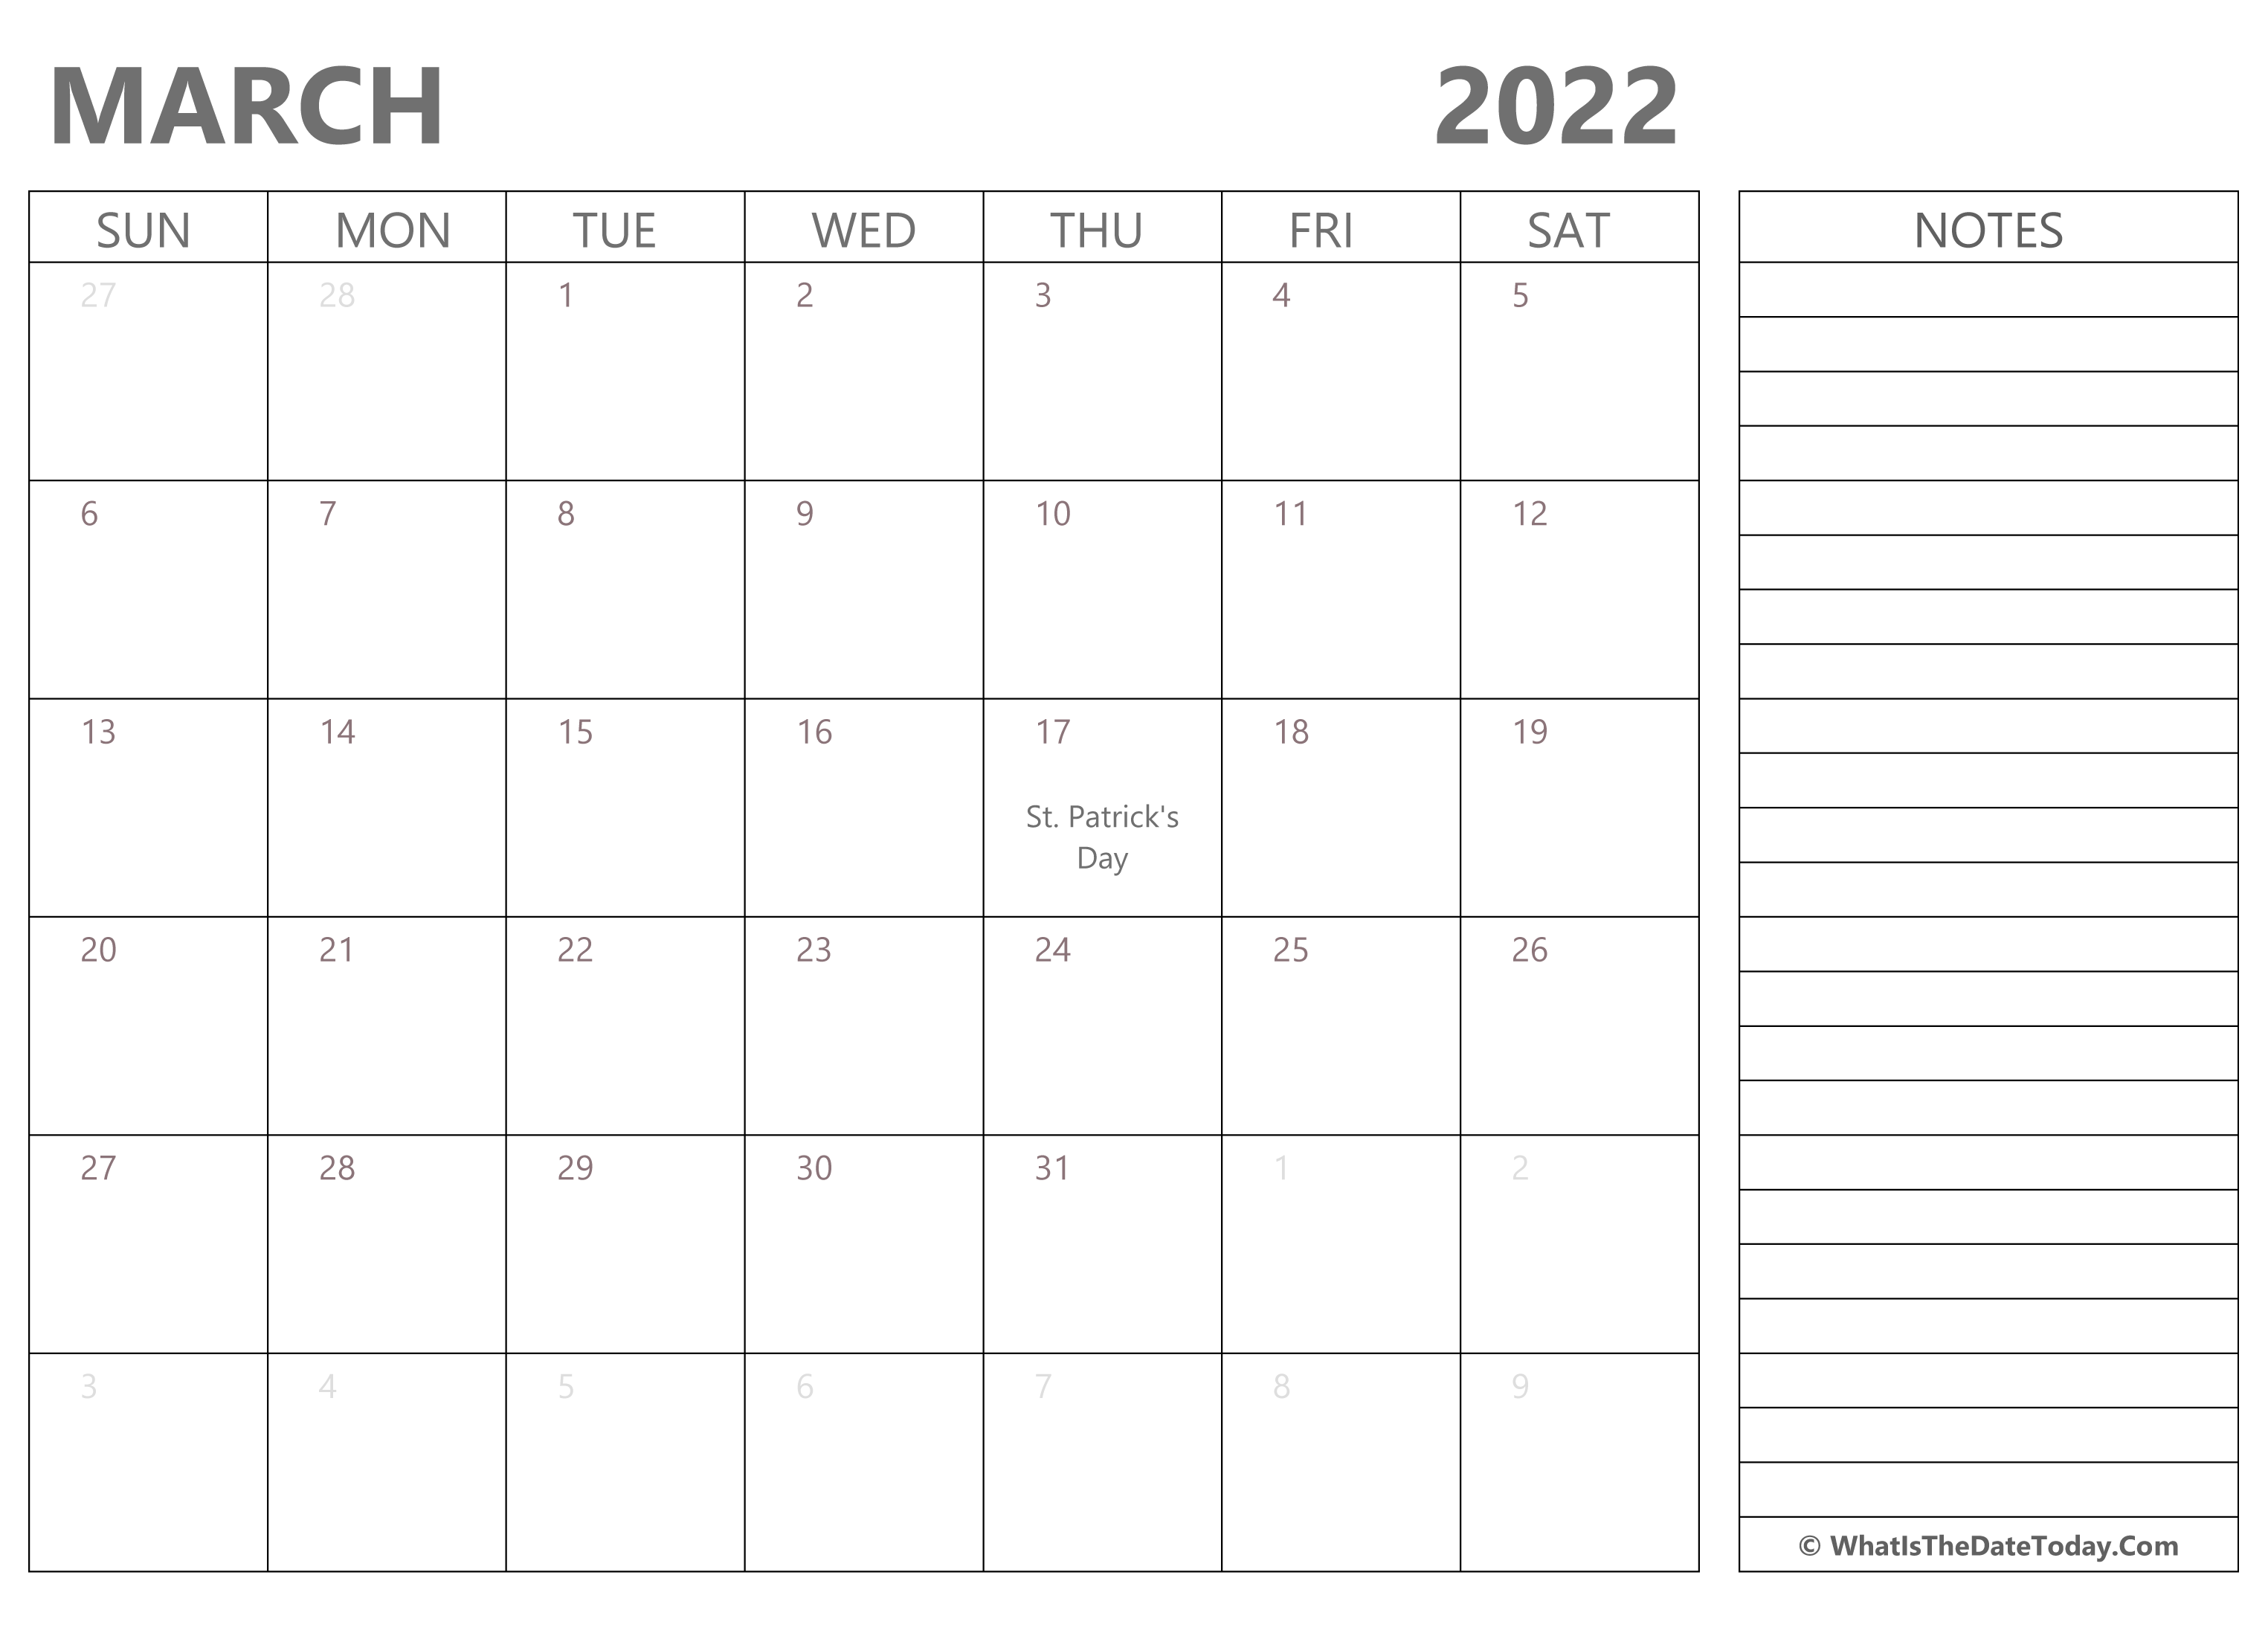 March 2022 Calendar Holidays Editable March 2022 Calendar With Holidays And Notes |  Whatisthedatetoday.com